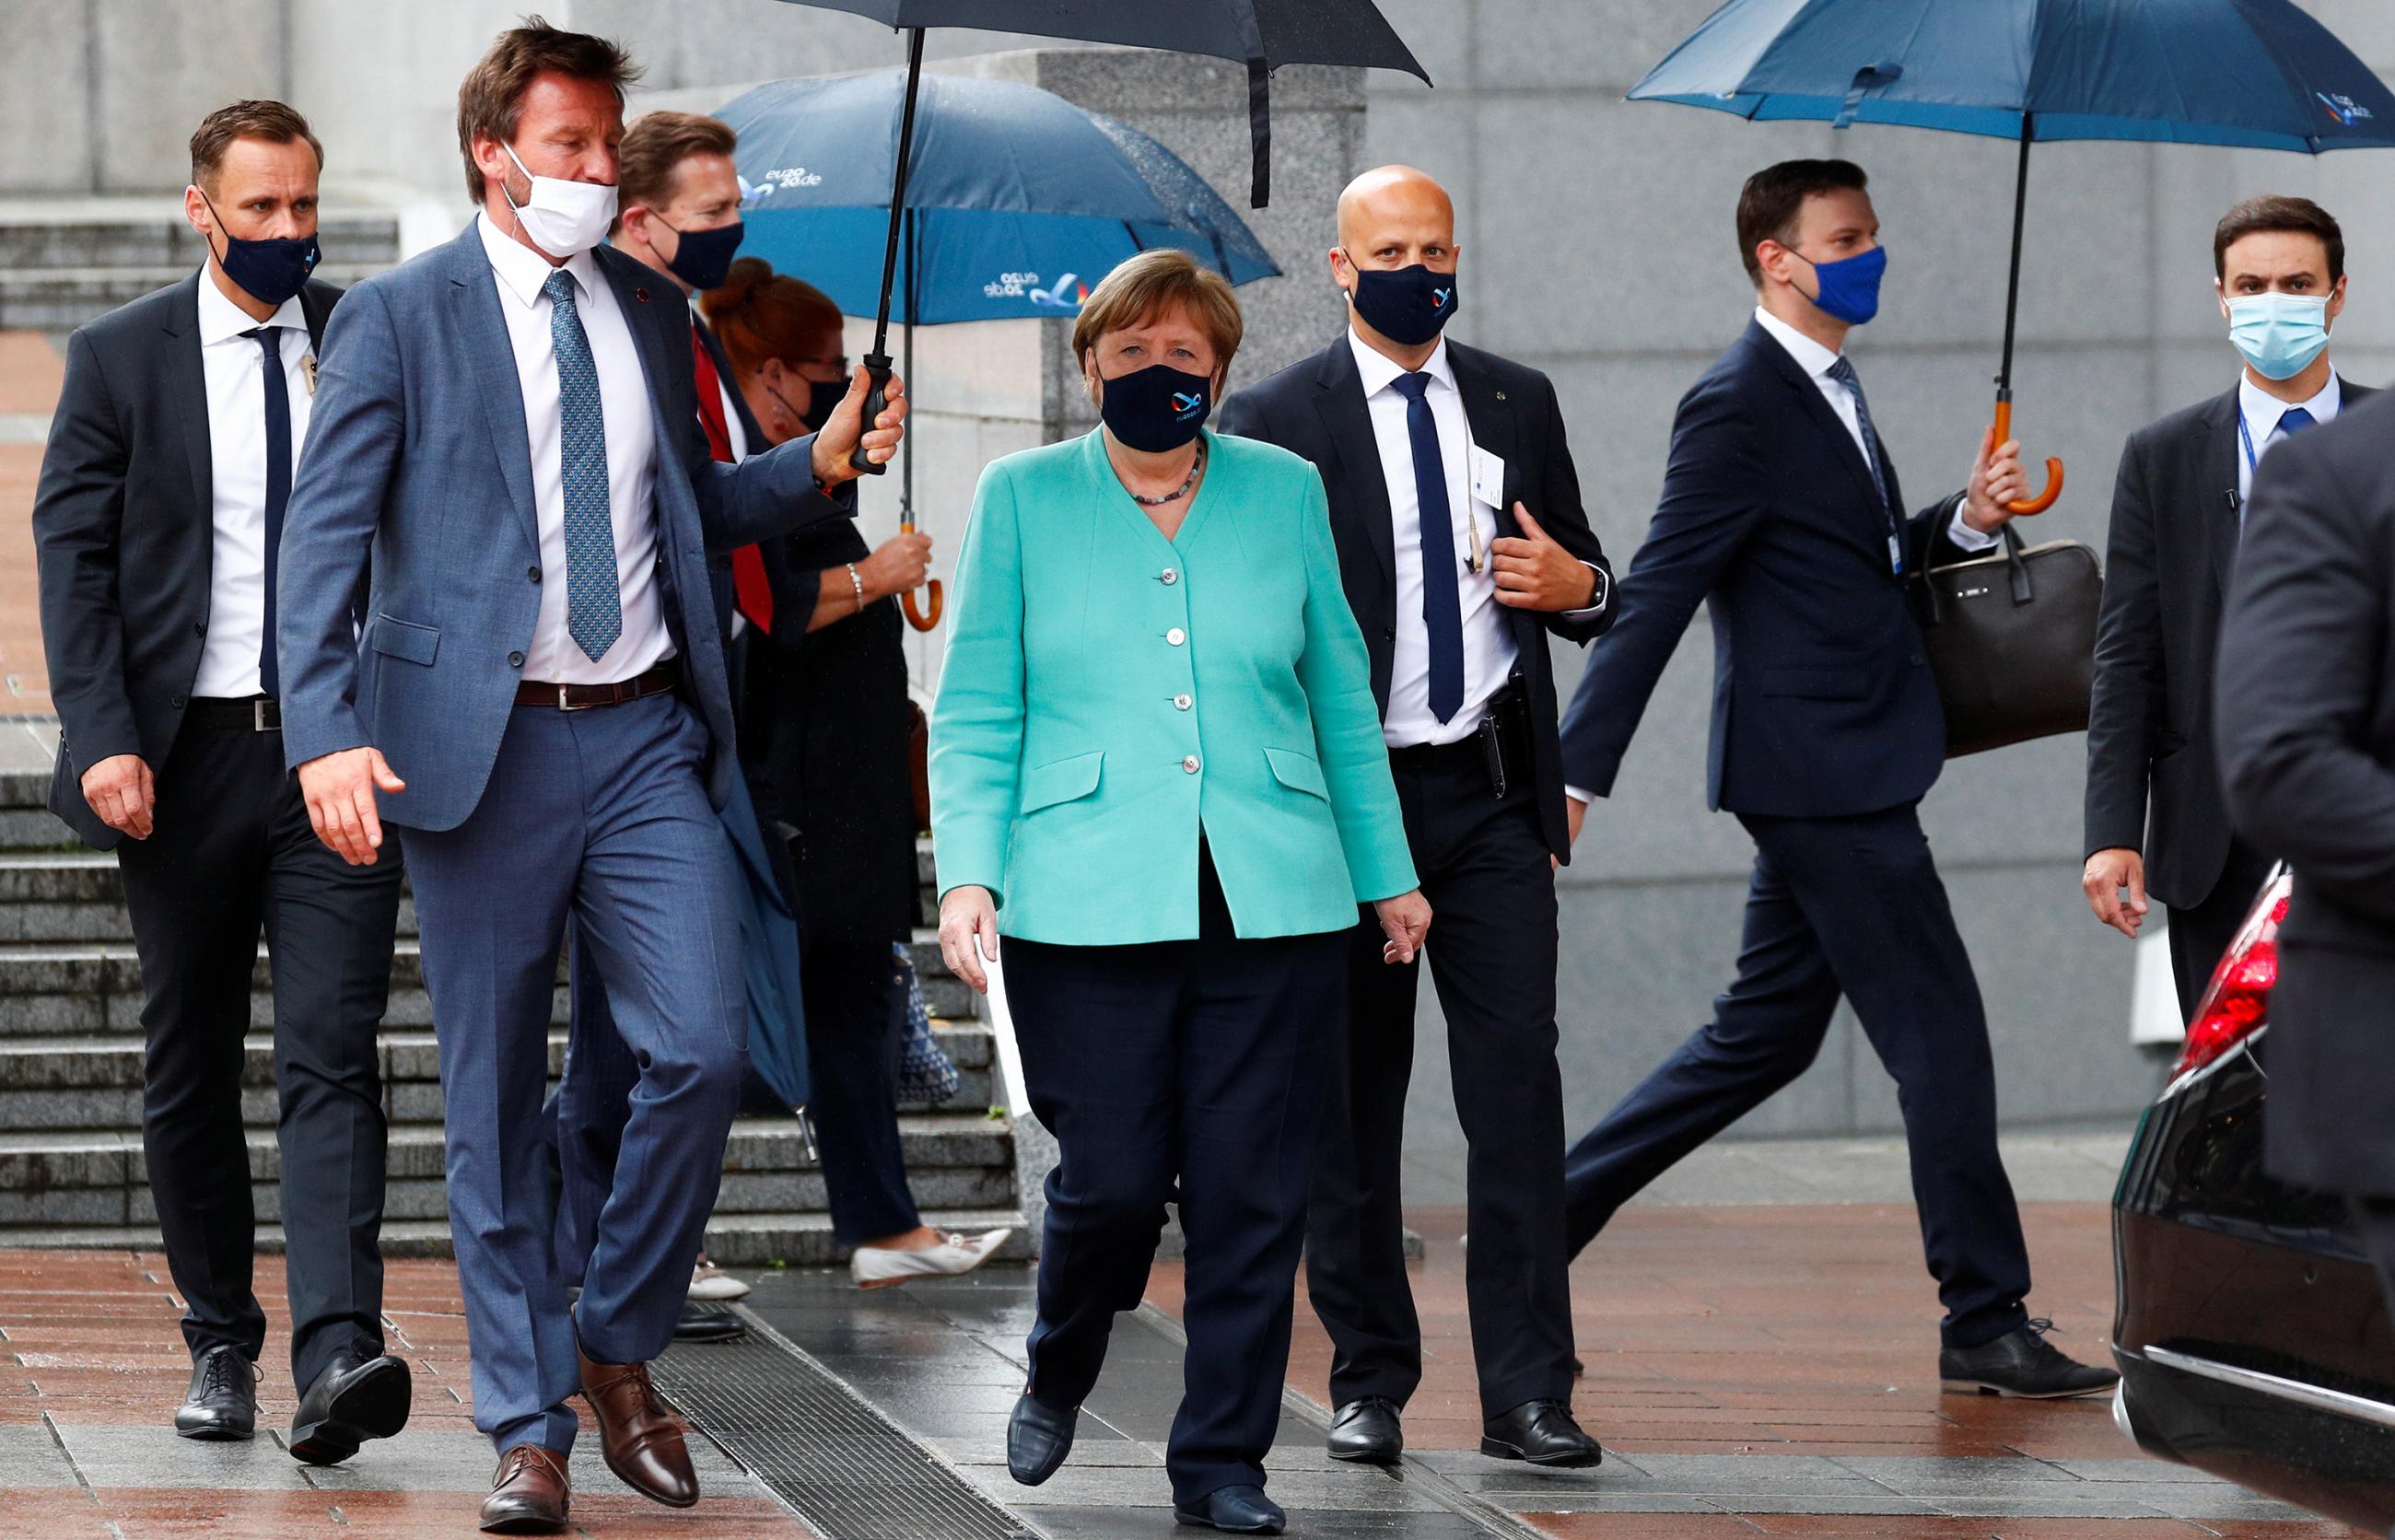 The photo shows Merkel walking toward the camera wearing a face mask amid a gaggle of men. She wears a pastel green blazer that stands out against their dark suits. One of her staff holds an umbrella out, shielding her. 